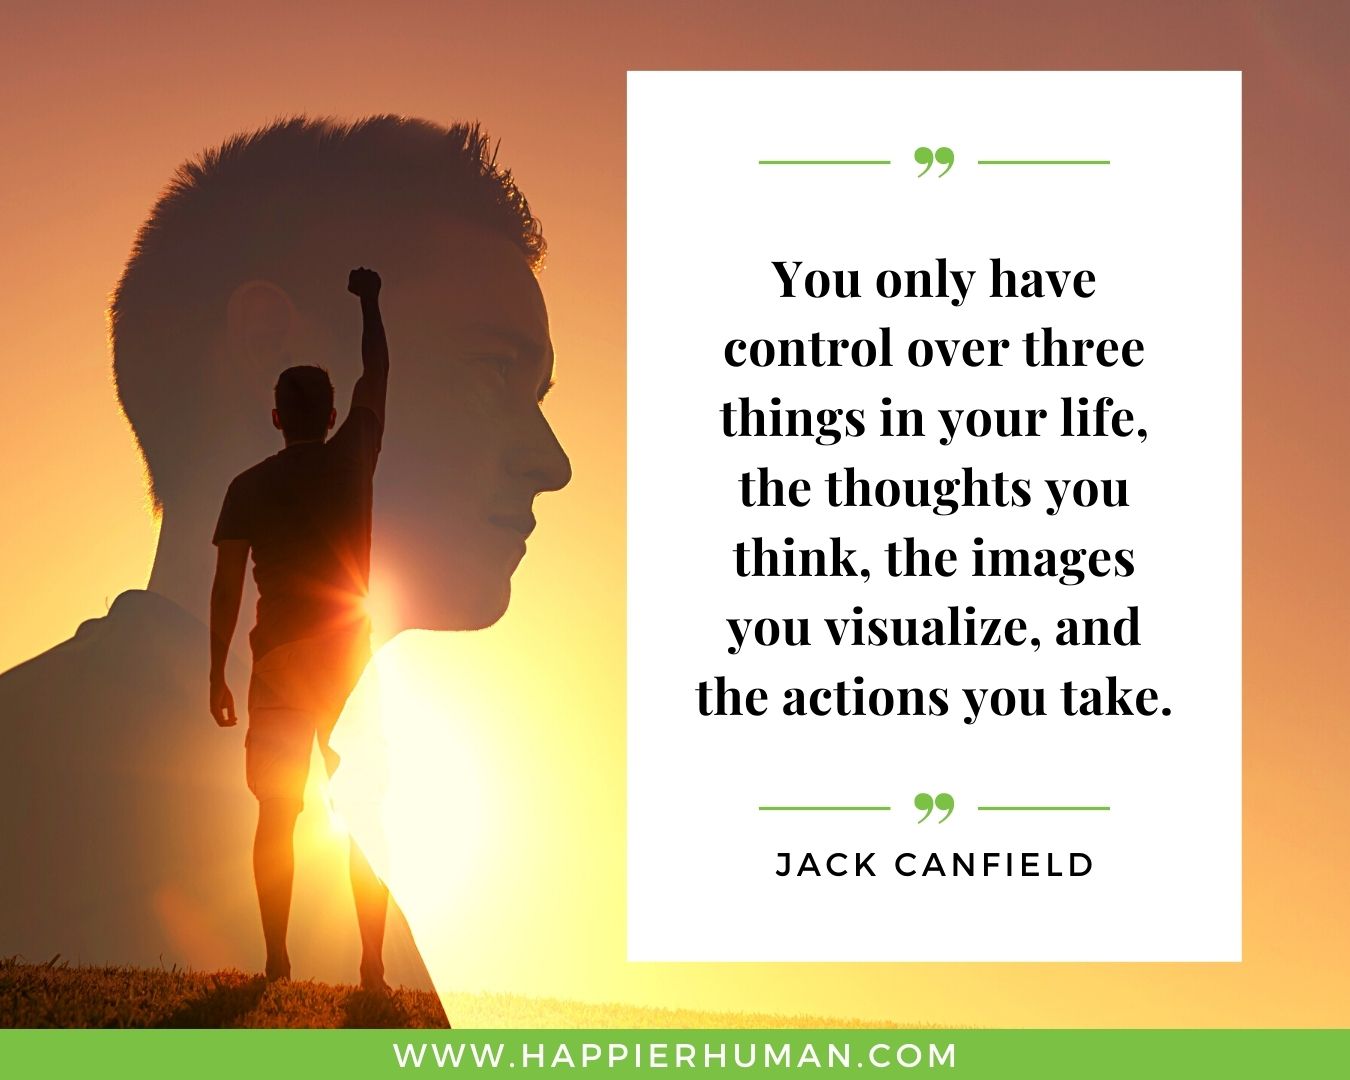 Overthinking Quotes - “You only have control over three things in your life, the thoughts you think, the images you visualize, and the actions you take.” – Jack Canfield